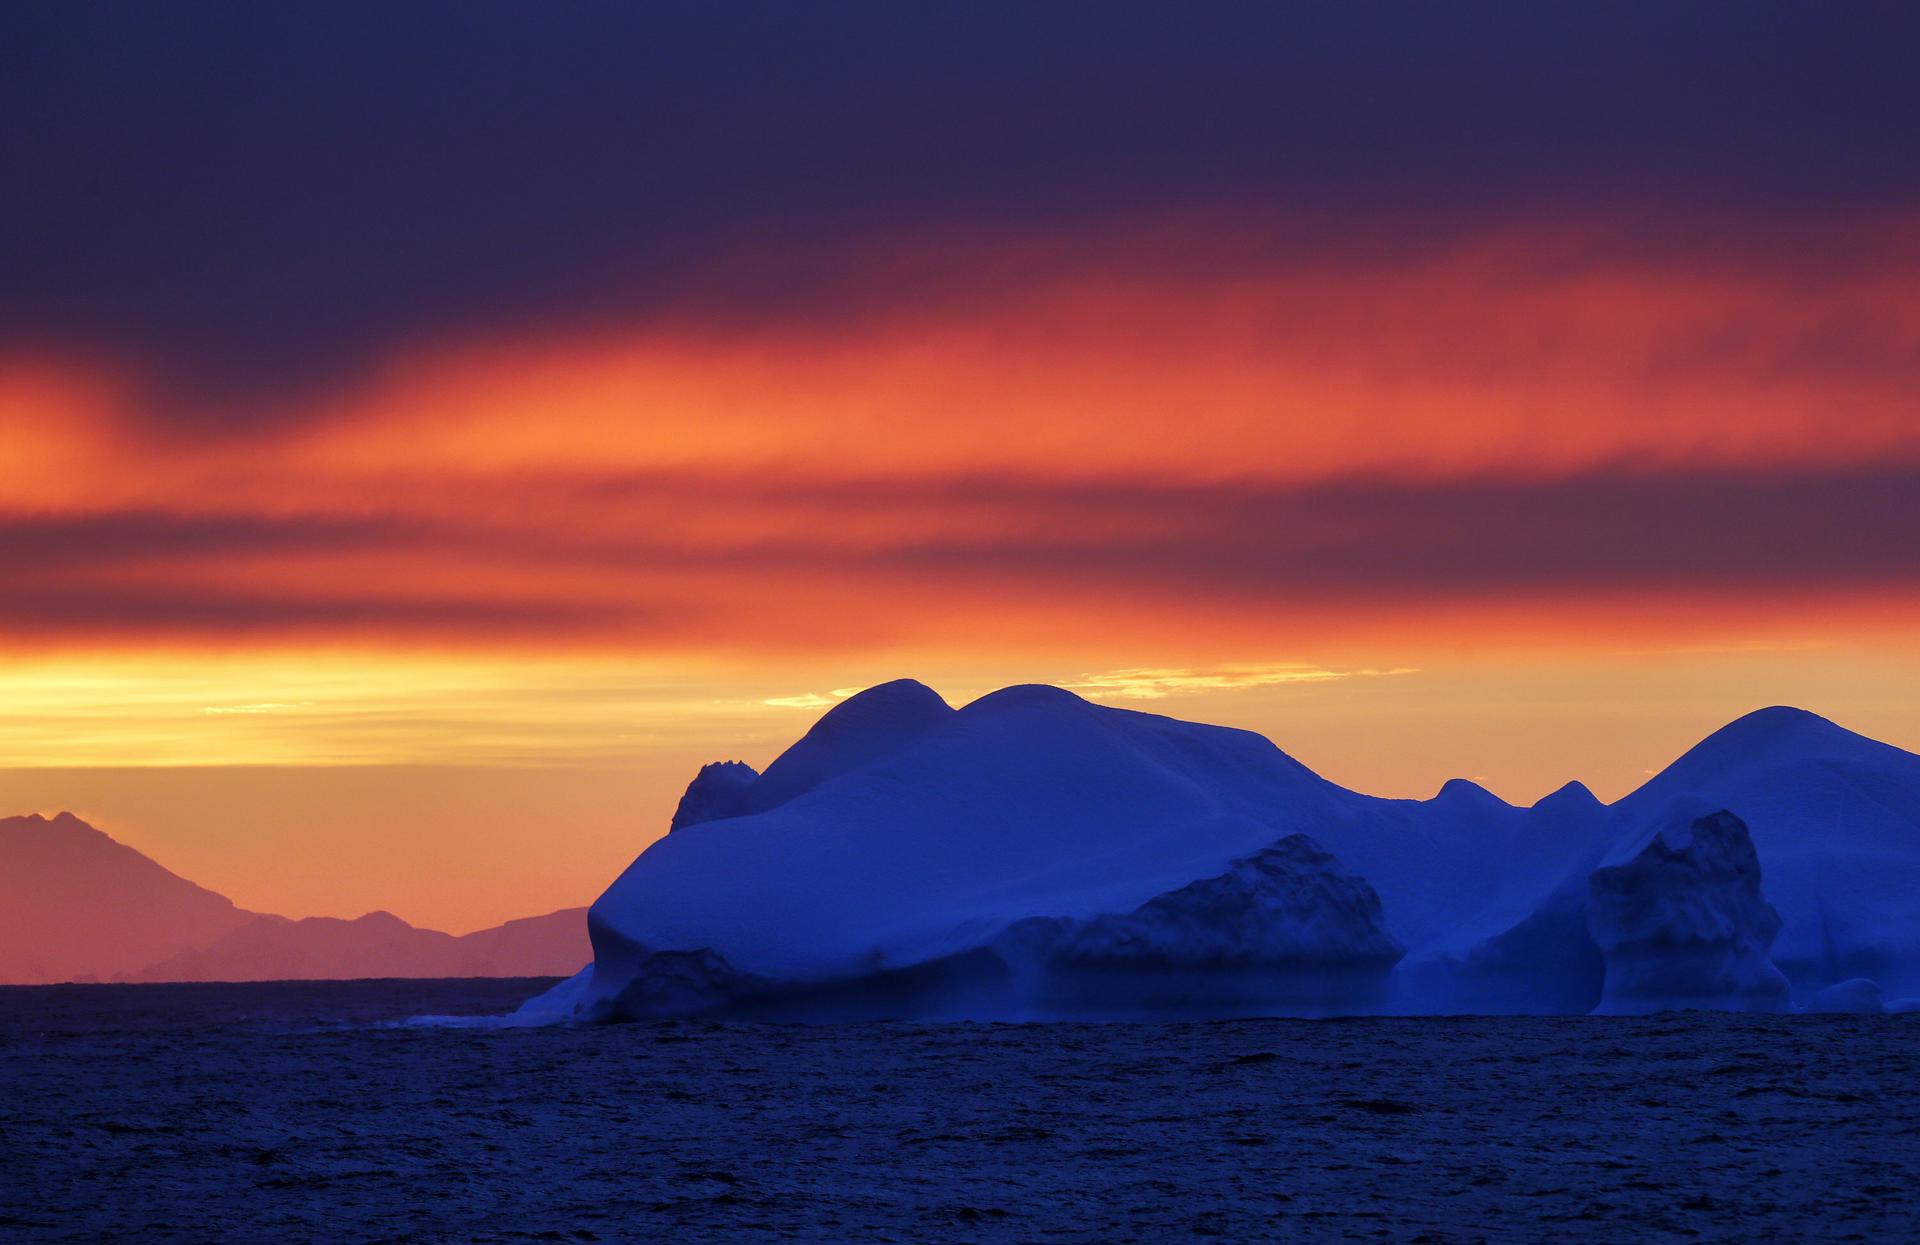 Photograph from February 19, 2013 that shows an iceberg at sunset near King George Island, in the archipelago of the South Shetland Islands , Antarctica. EFE/Felipe Trueba